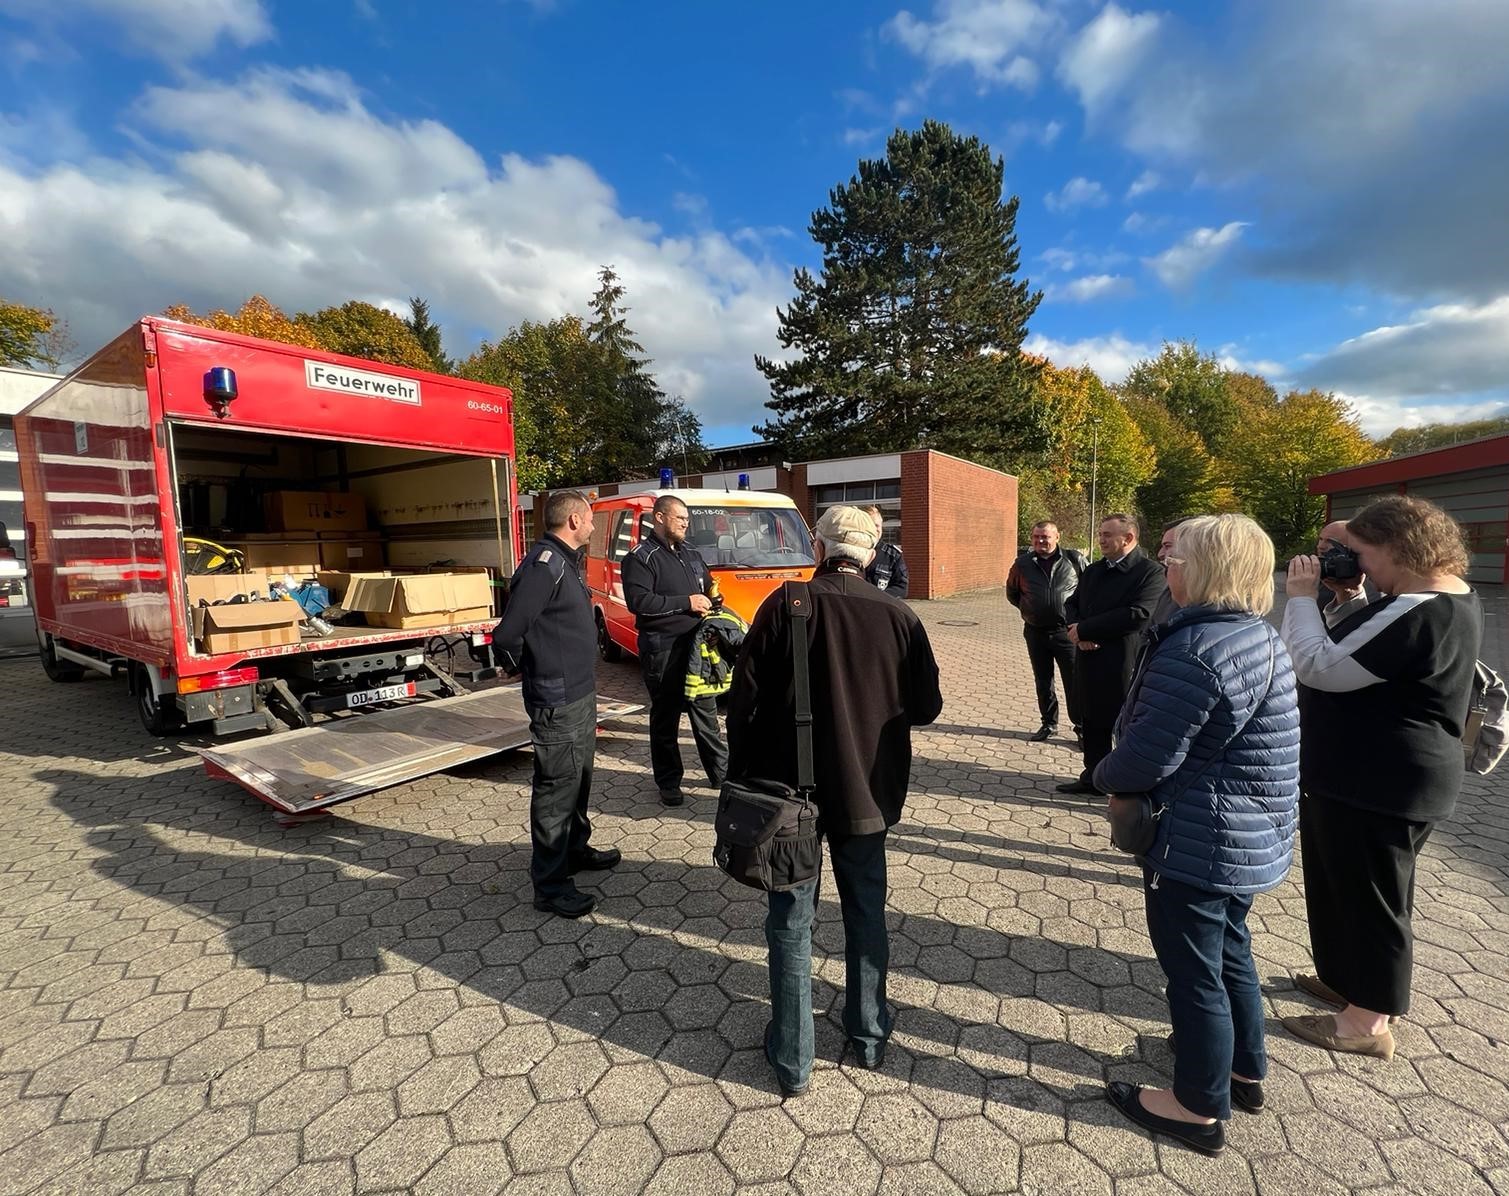 Sister city helps Sokyryany municipality with technical support in fire safety